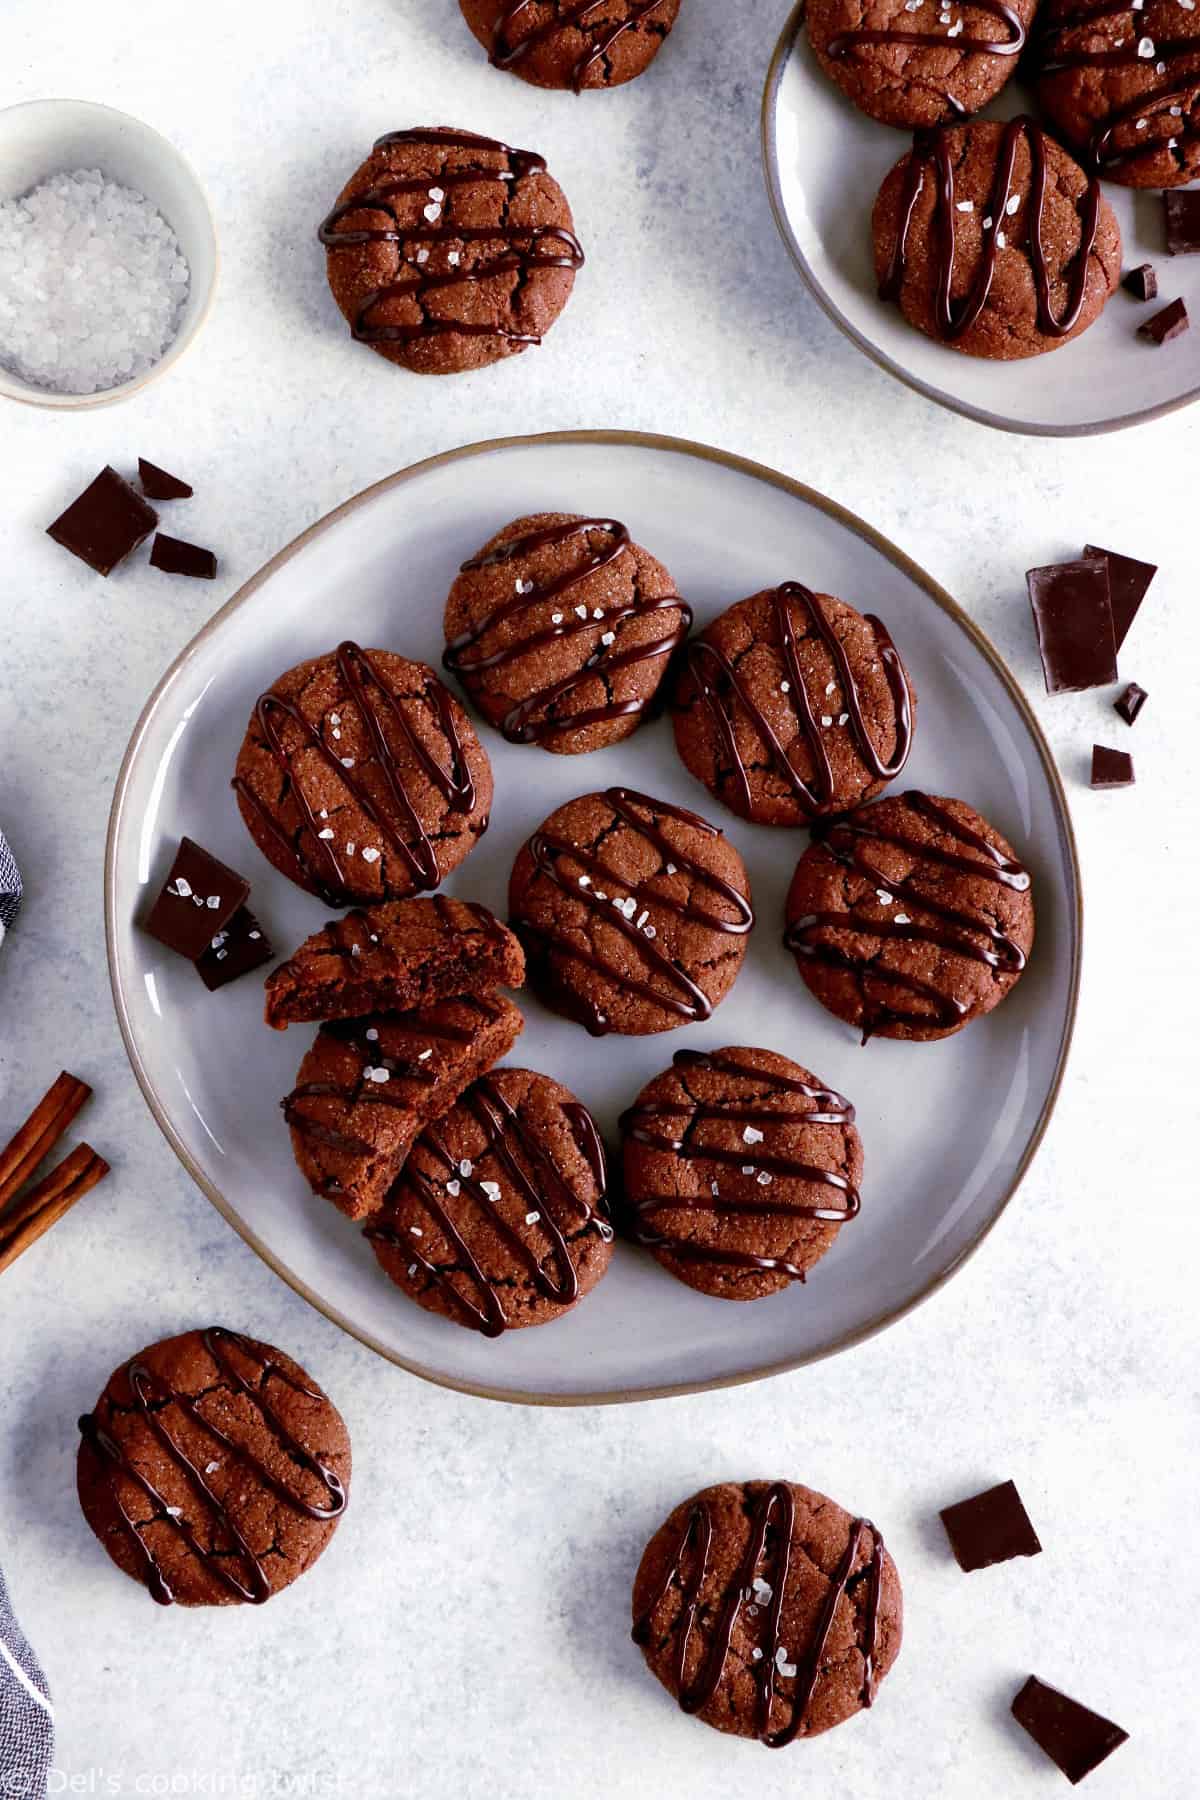 Mexican Chocolate snickerdoodles are a lovely take on the classic snickerdoodles that pack a powerful flavor punch.